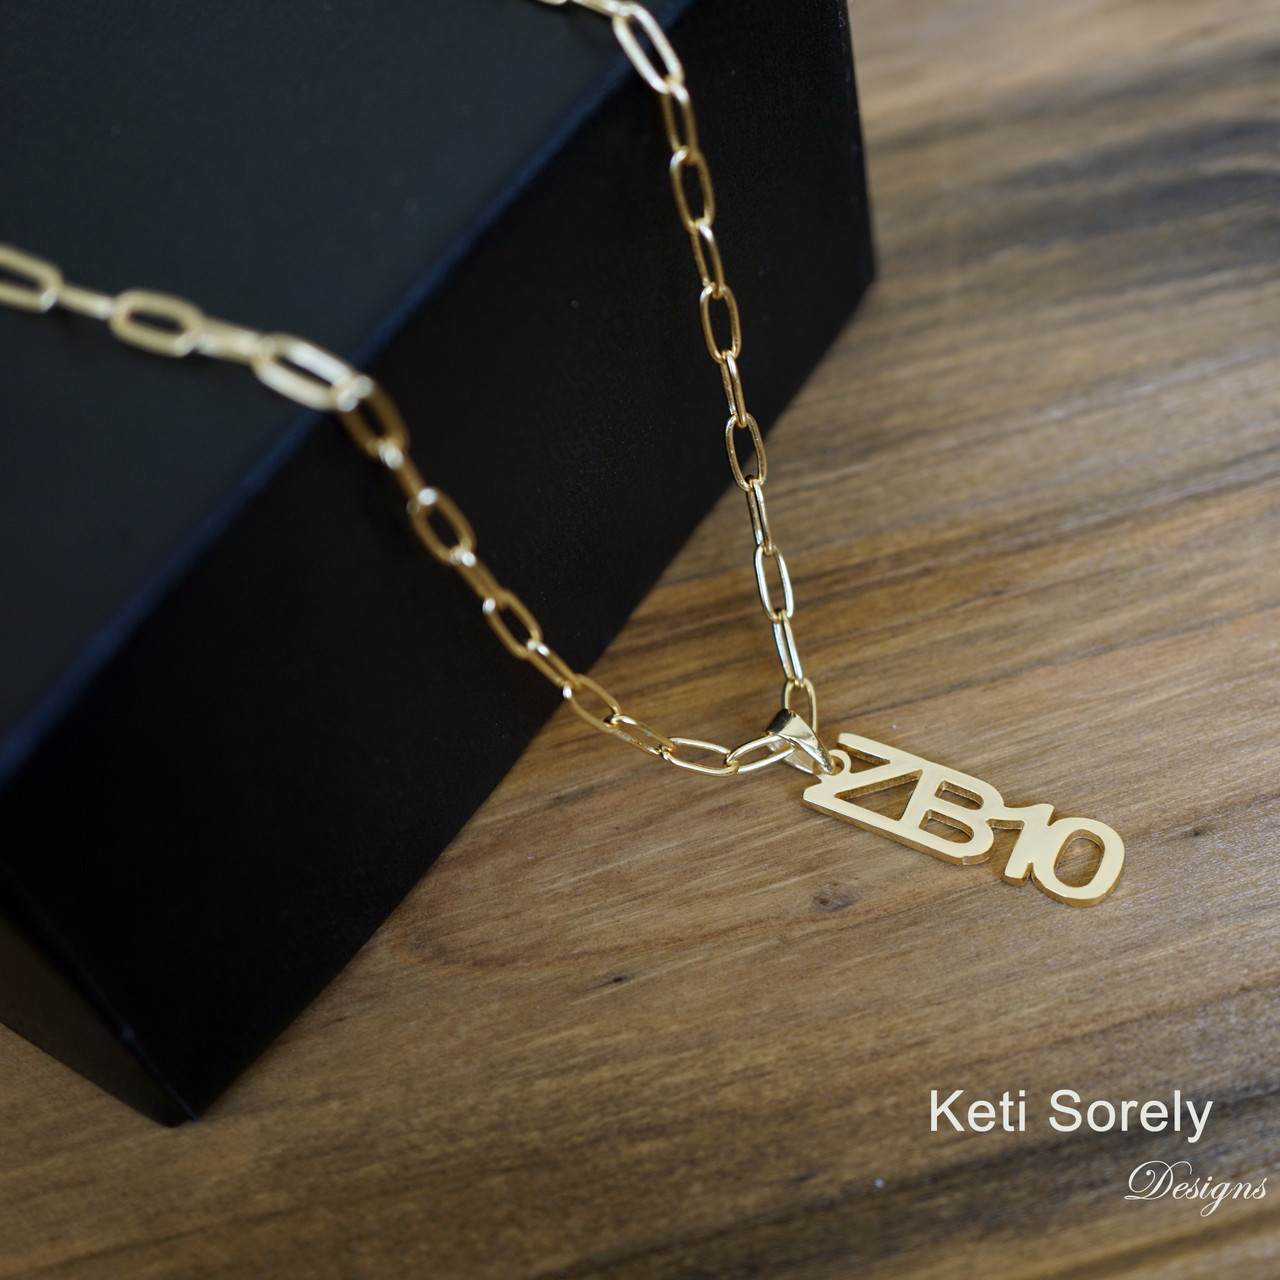 Personalized Double Name Gold Charm Anklet And Necklace Set With Gold Chain  Stainless Steel Jewelry Gift For Women Para Muji 231120 From Xue08, $10.1 |  DHgate.Com